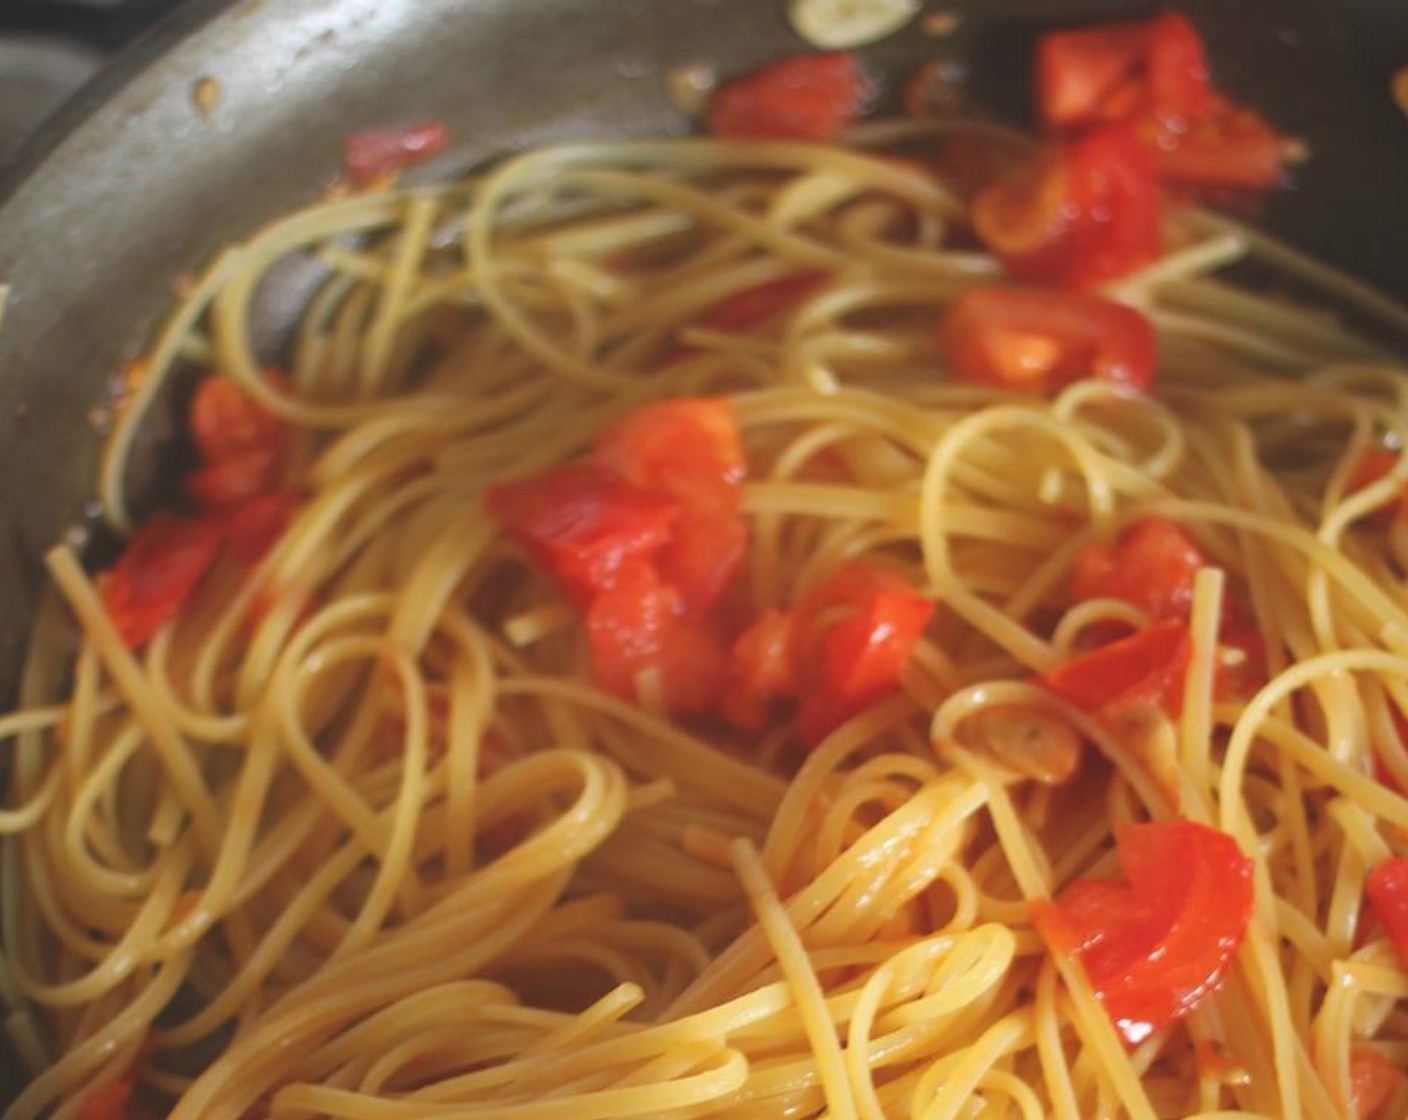 step 6 Your pasta should be about halfway cooked.  Turn the pan to high heat and add the pasta right from the pot. Don't drain the pasta first.  You'll continue to cook it in the garlic, oil, and tomatoes until it is al dente.